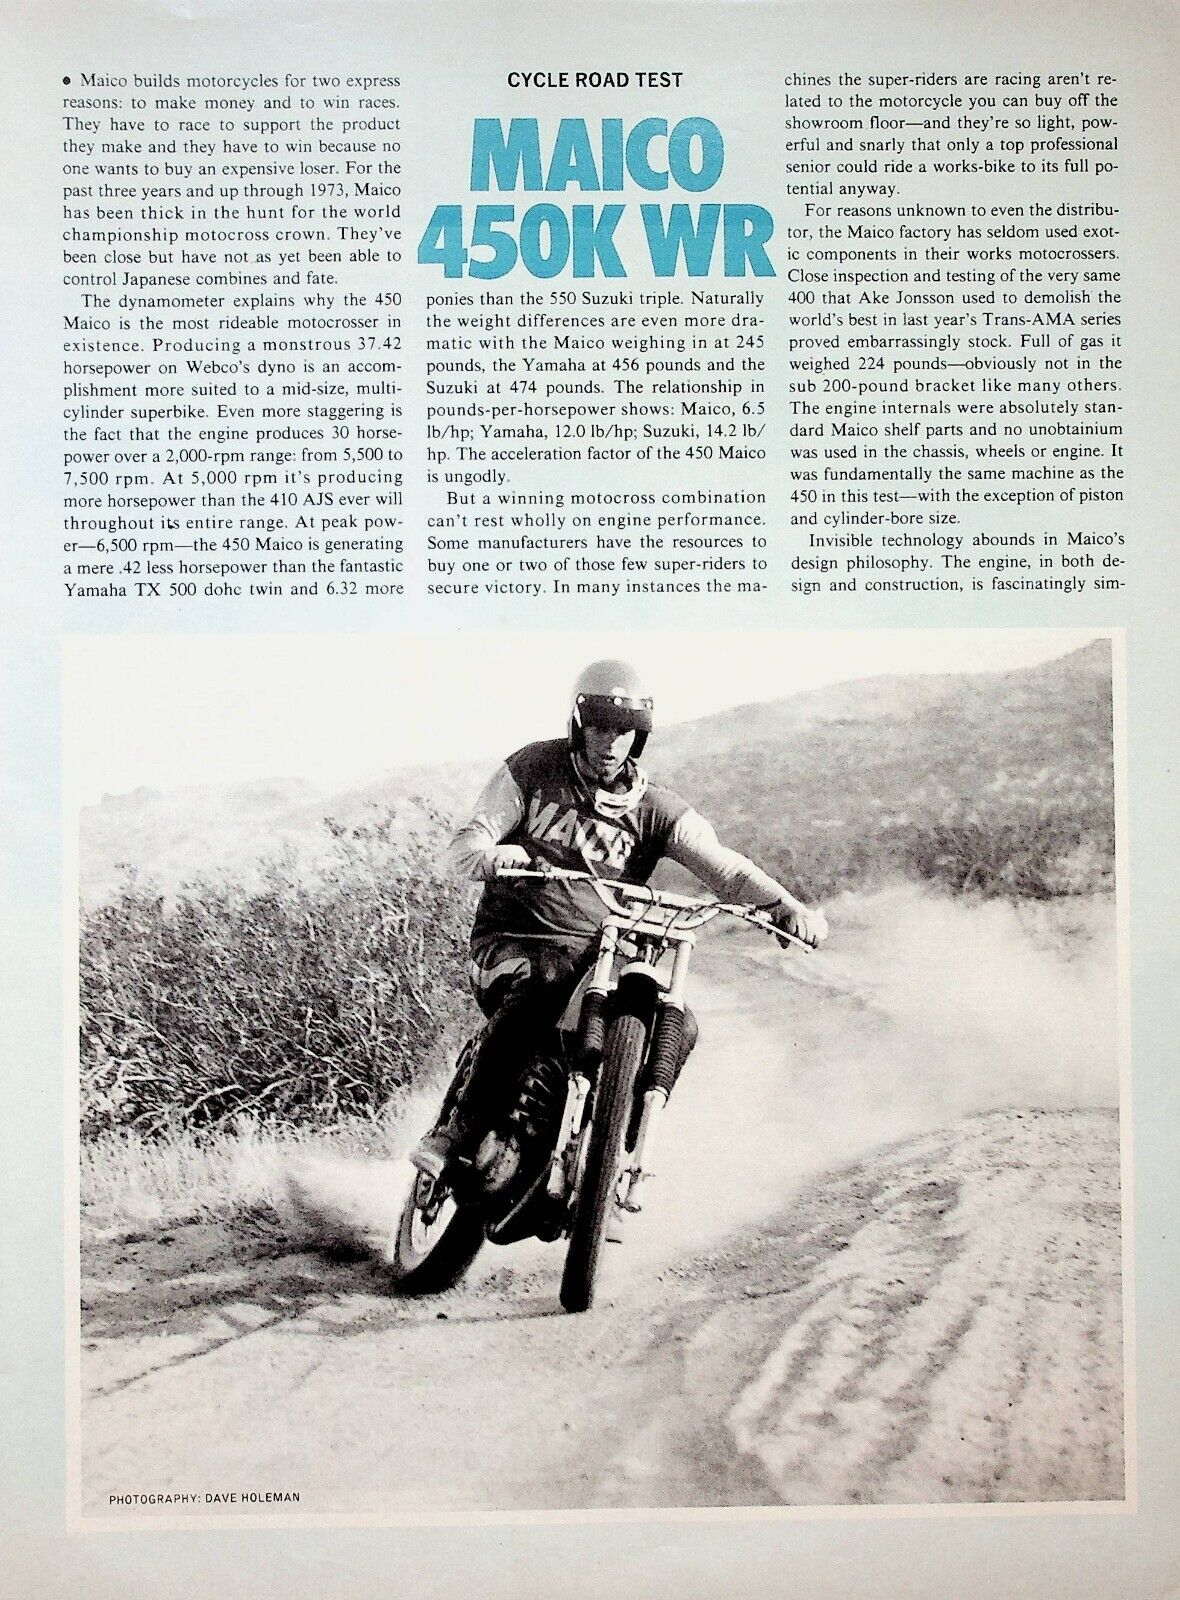 1973 Maico 450K WR - 7-Page Vintage Motorcycle Road Test Article